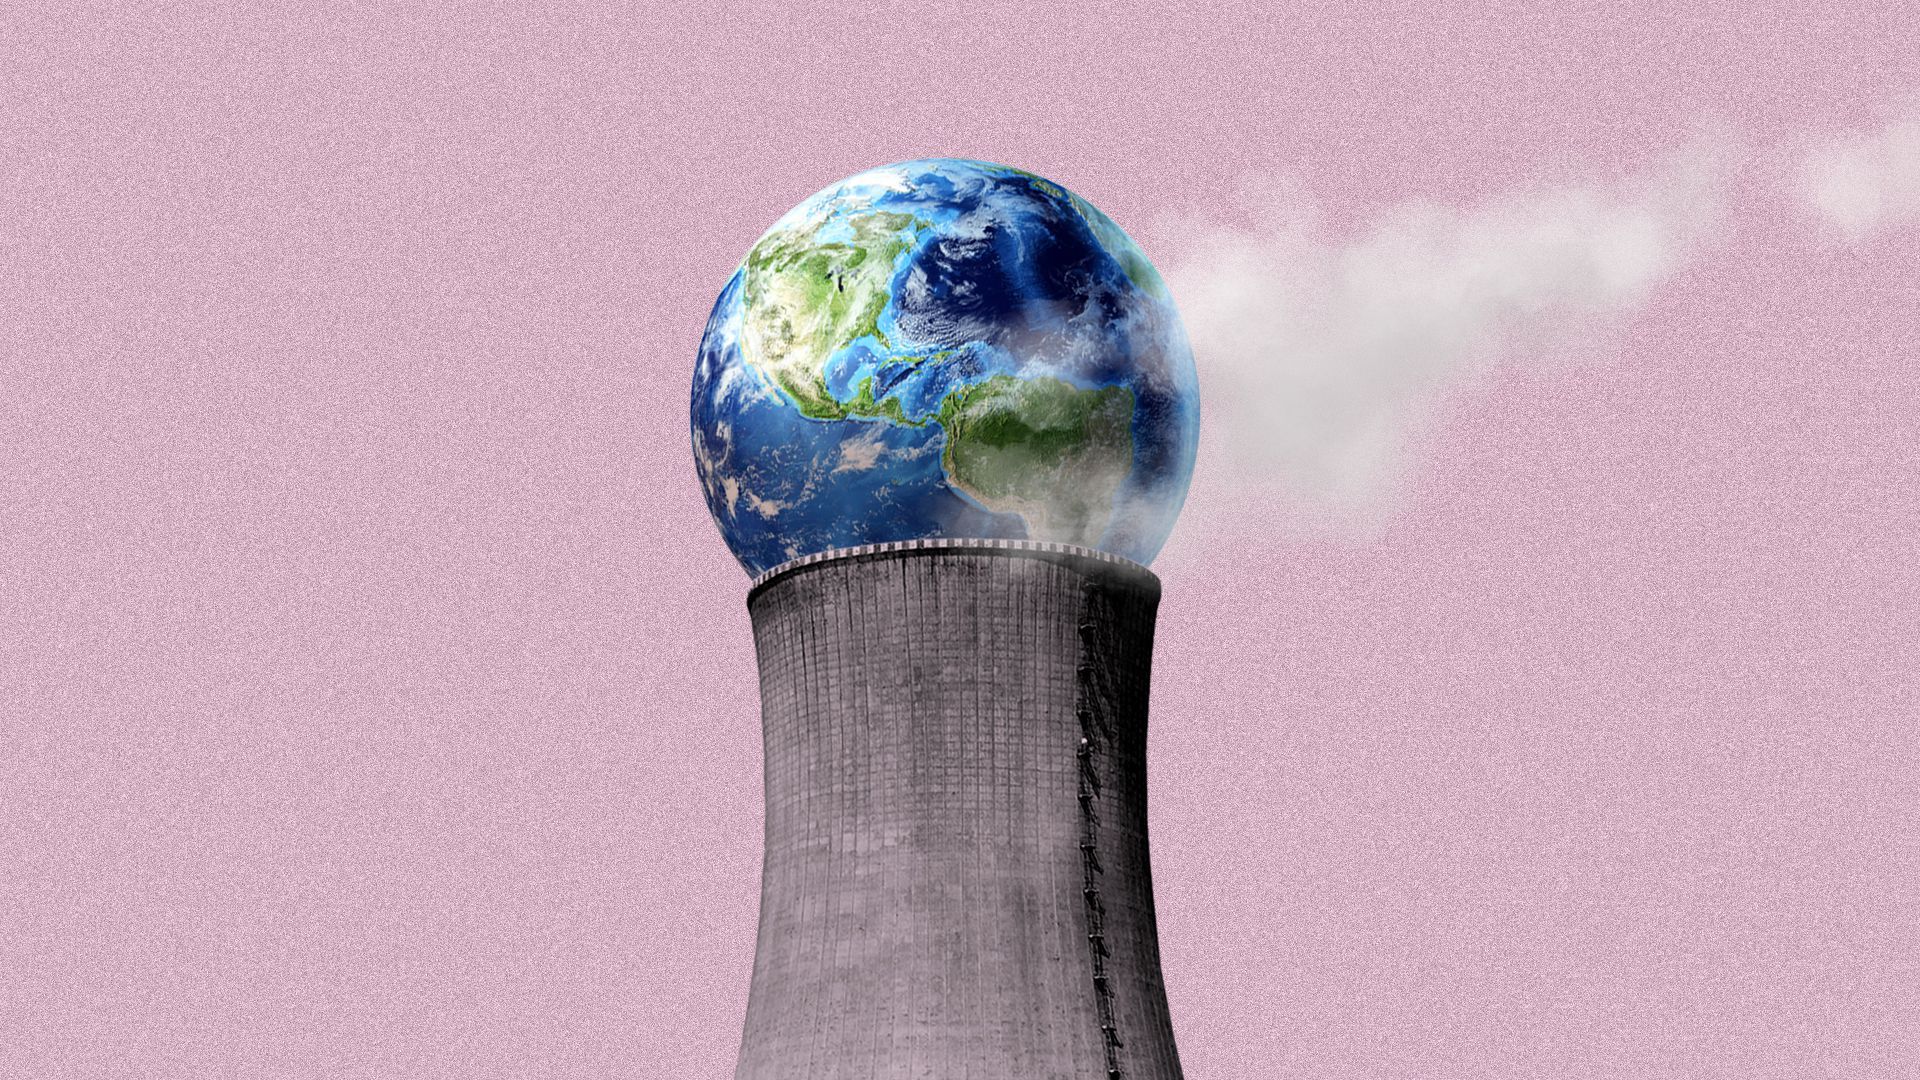 Illustration of nuclear cooling tower with earth sitting on top